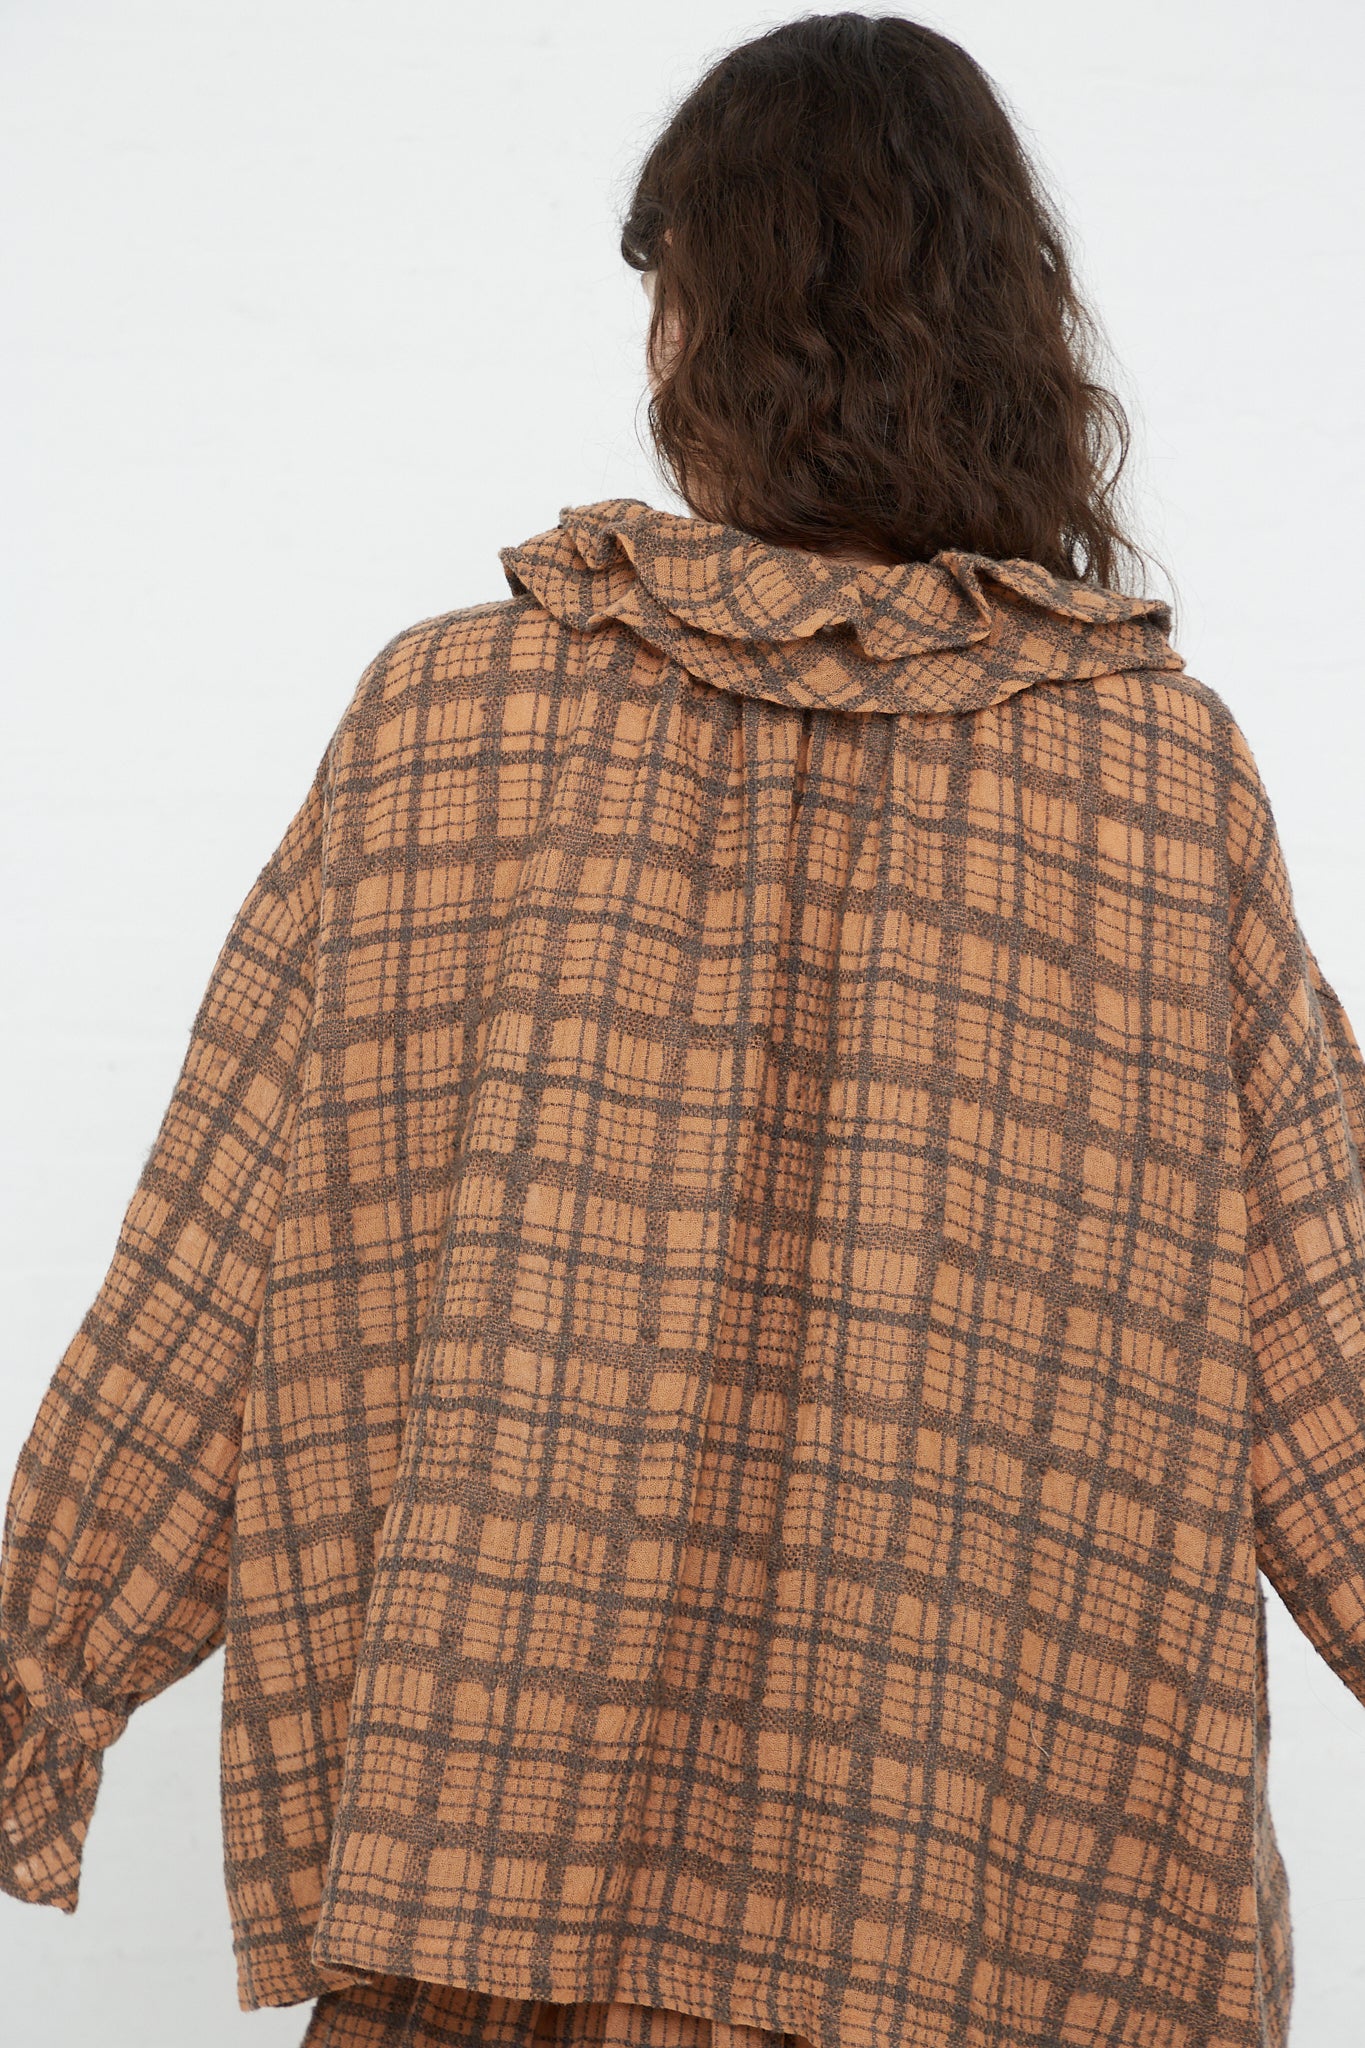 The back view of a woman wearing a Ichi Antiquités Wool Check Frill Blouse in Terracotta.